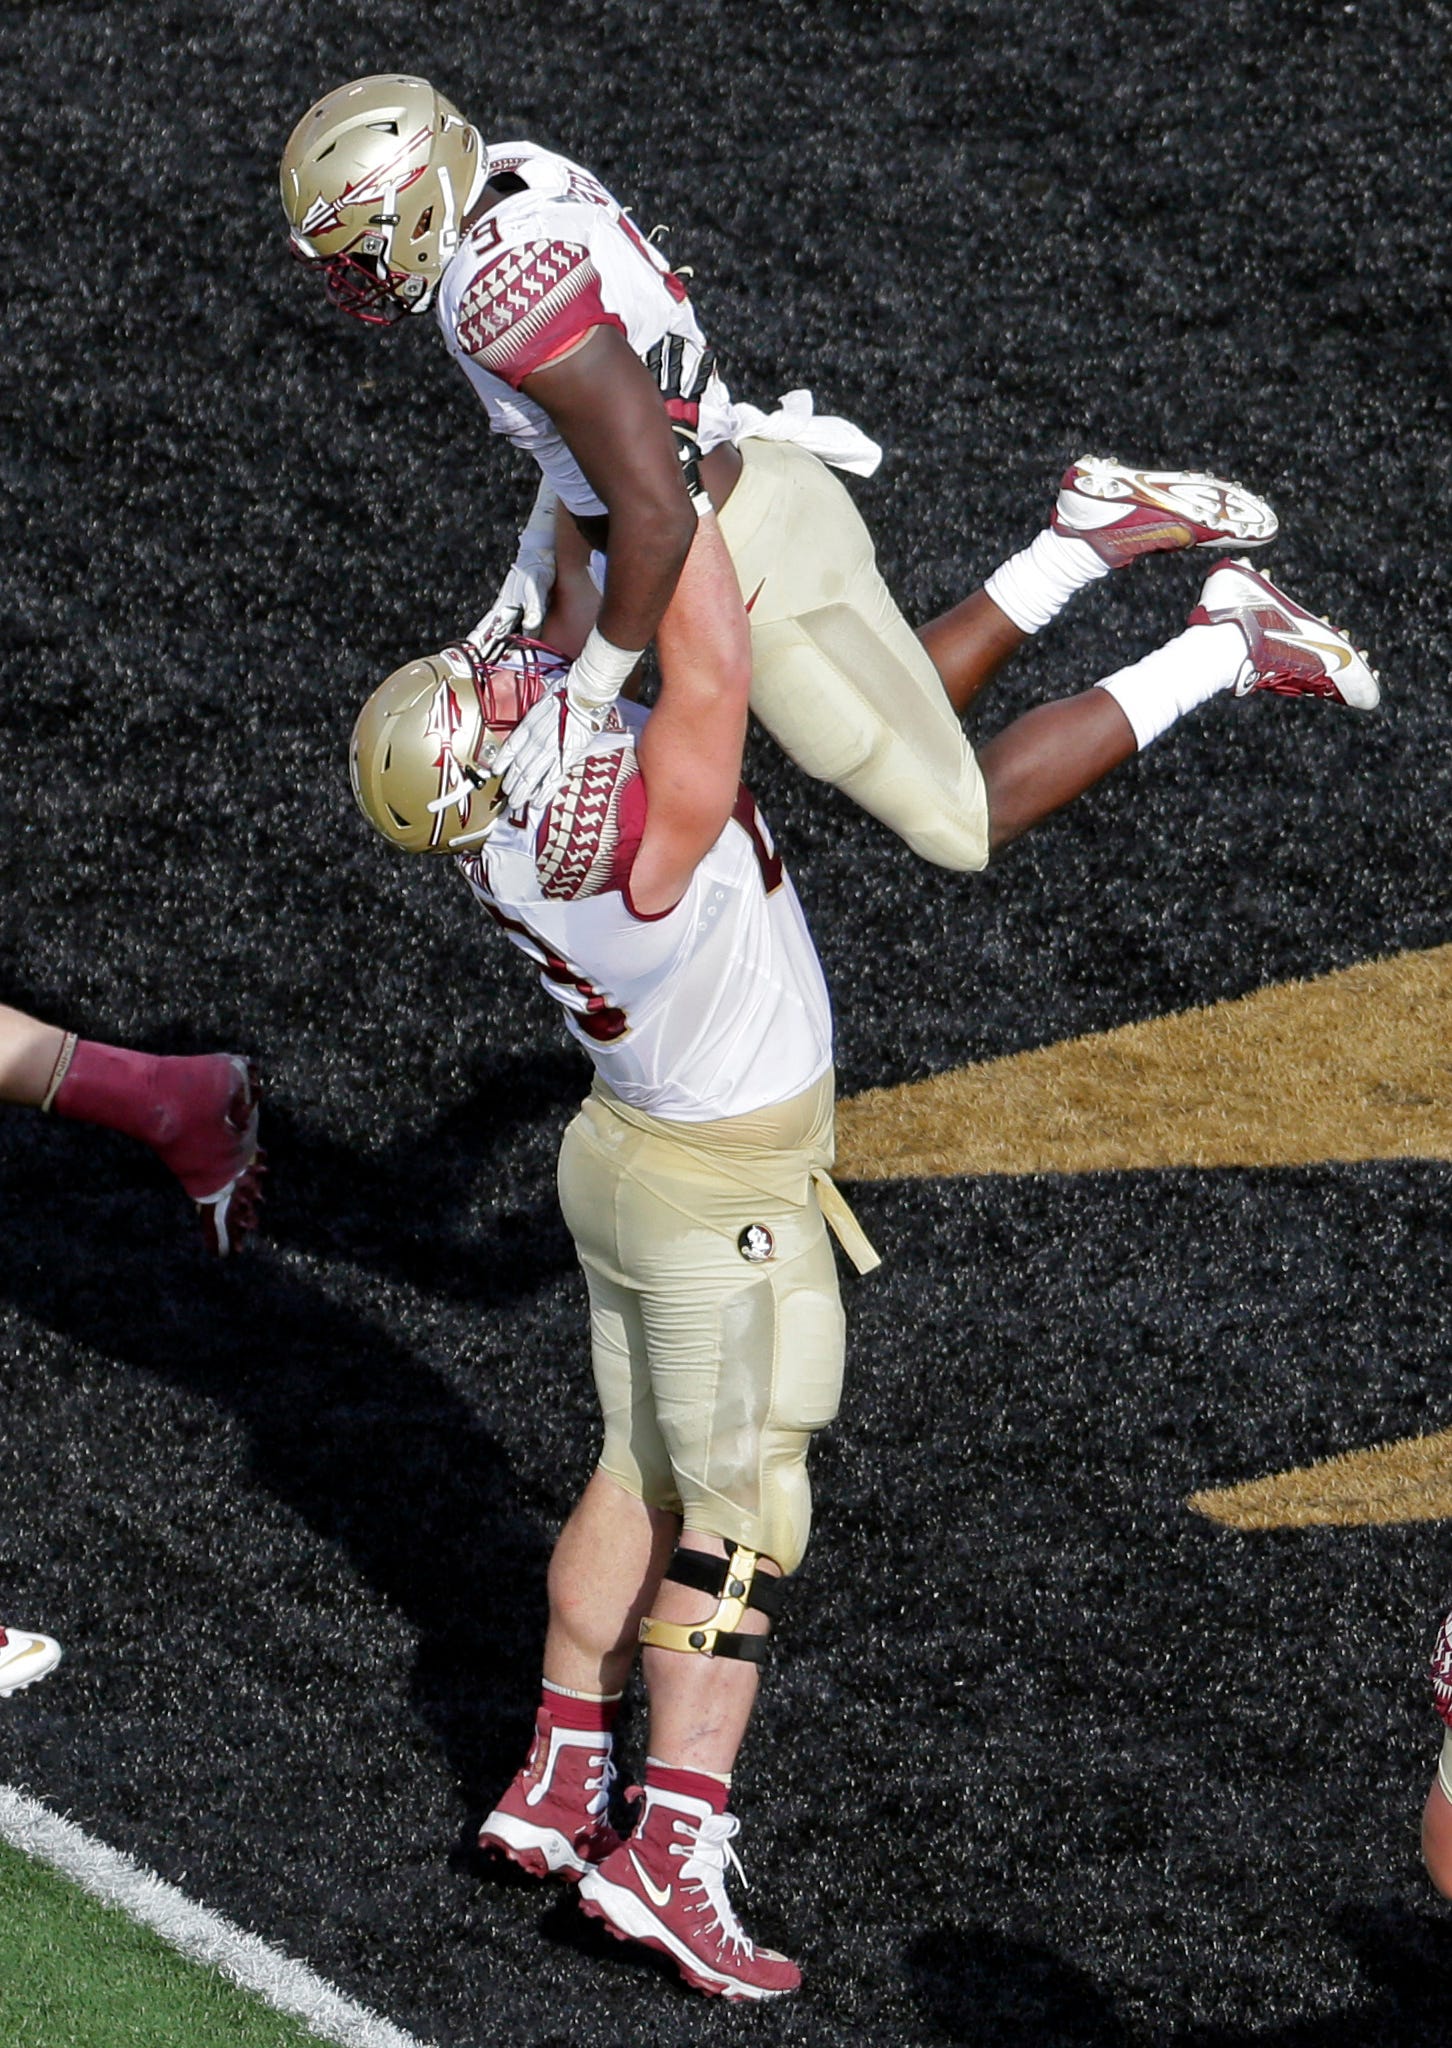 Florida State's Jacques Patrick (9) is lifted by Landon Dickerson (69) after his touchdown run against Wake Forest in the first half of an NCAA college football game in Winston-Salem, N.C., Saturday, Sept. 30, 2017. (AP Photo/Chuck Burton)